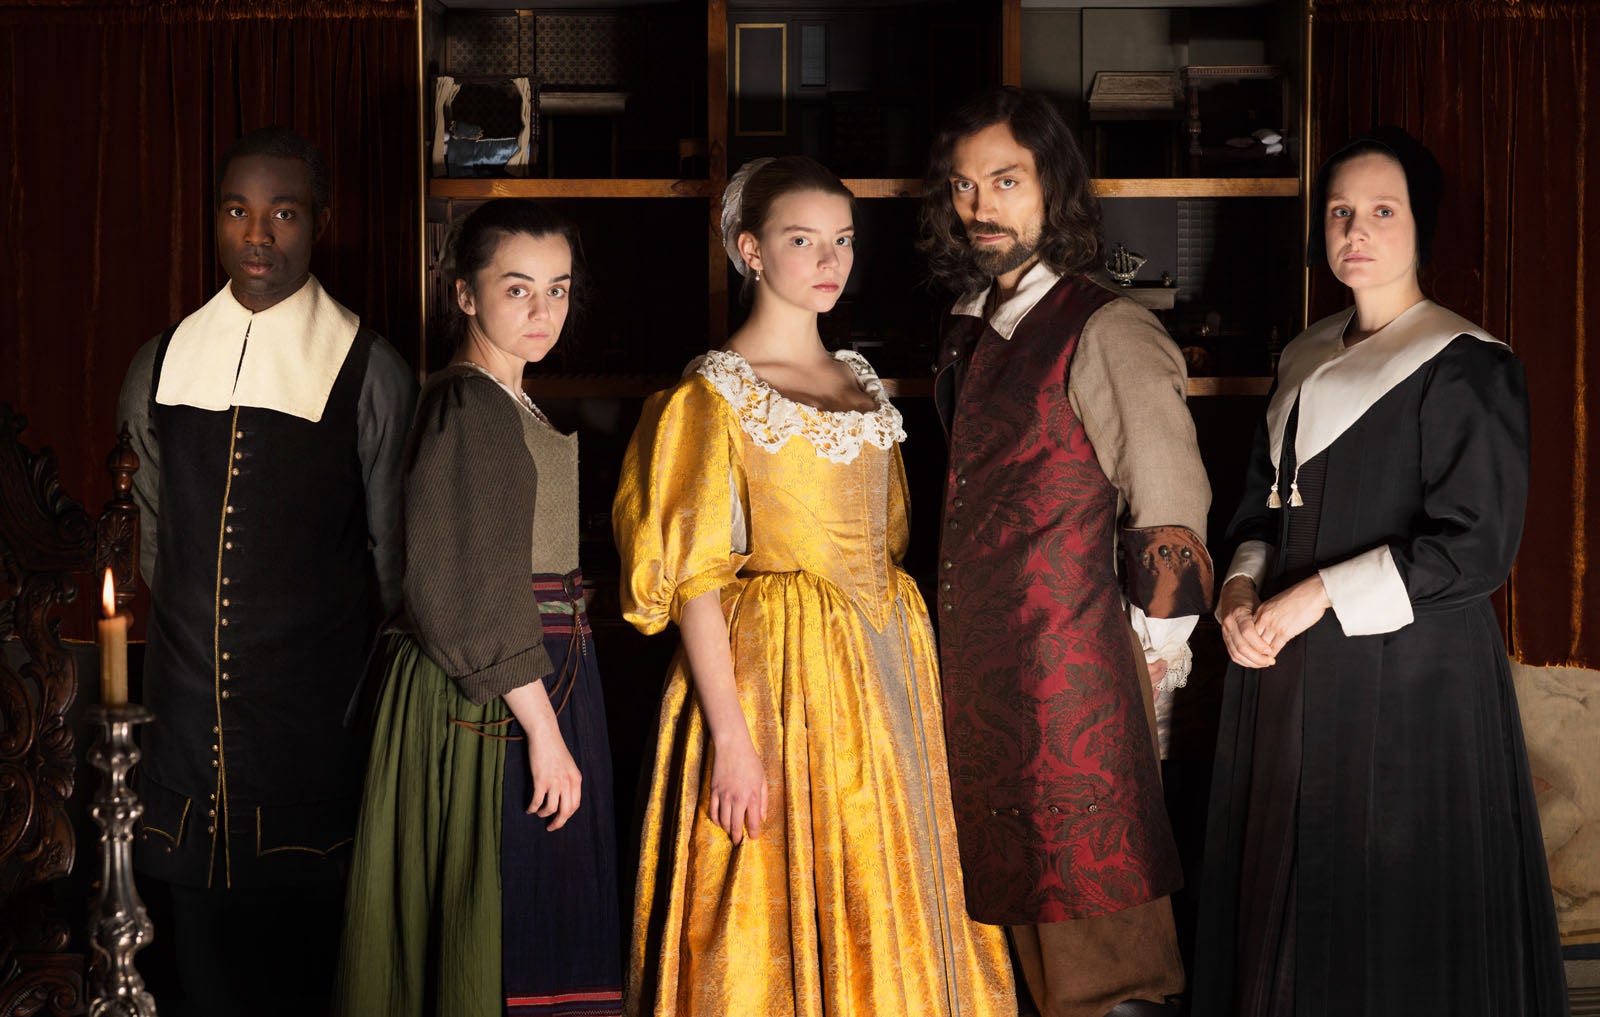 Photo taken from the TV Series The Miniaturist, depicting five cast members in period dress